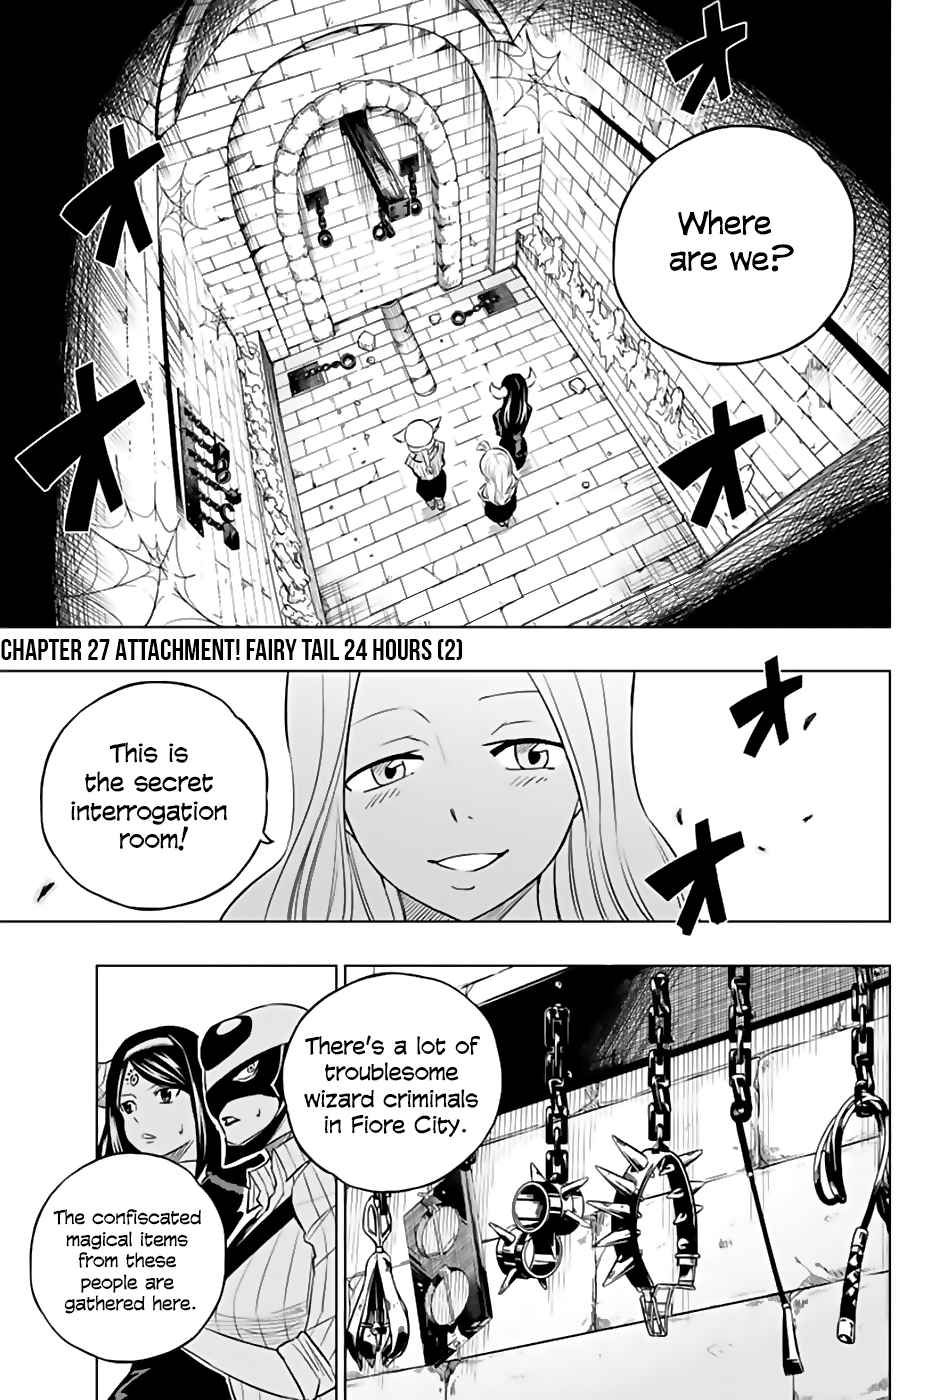 Fairy Tail: City Hero Ch. 27 Attachment! Fairy Tail 24 Hours 2